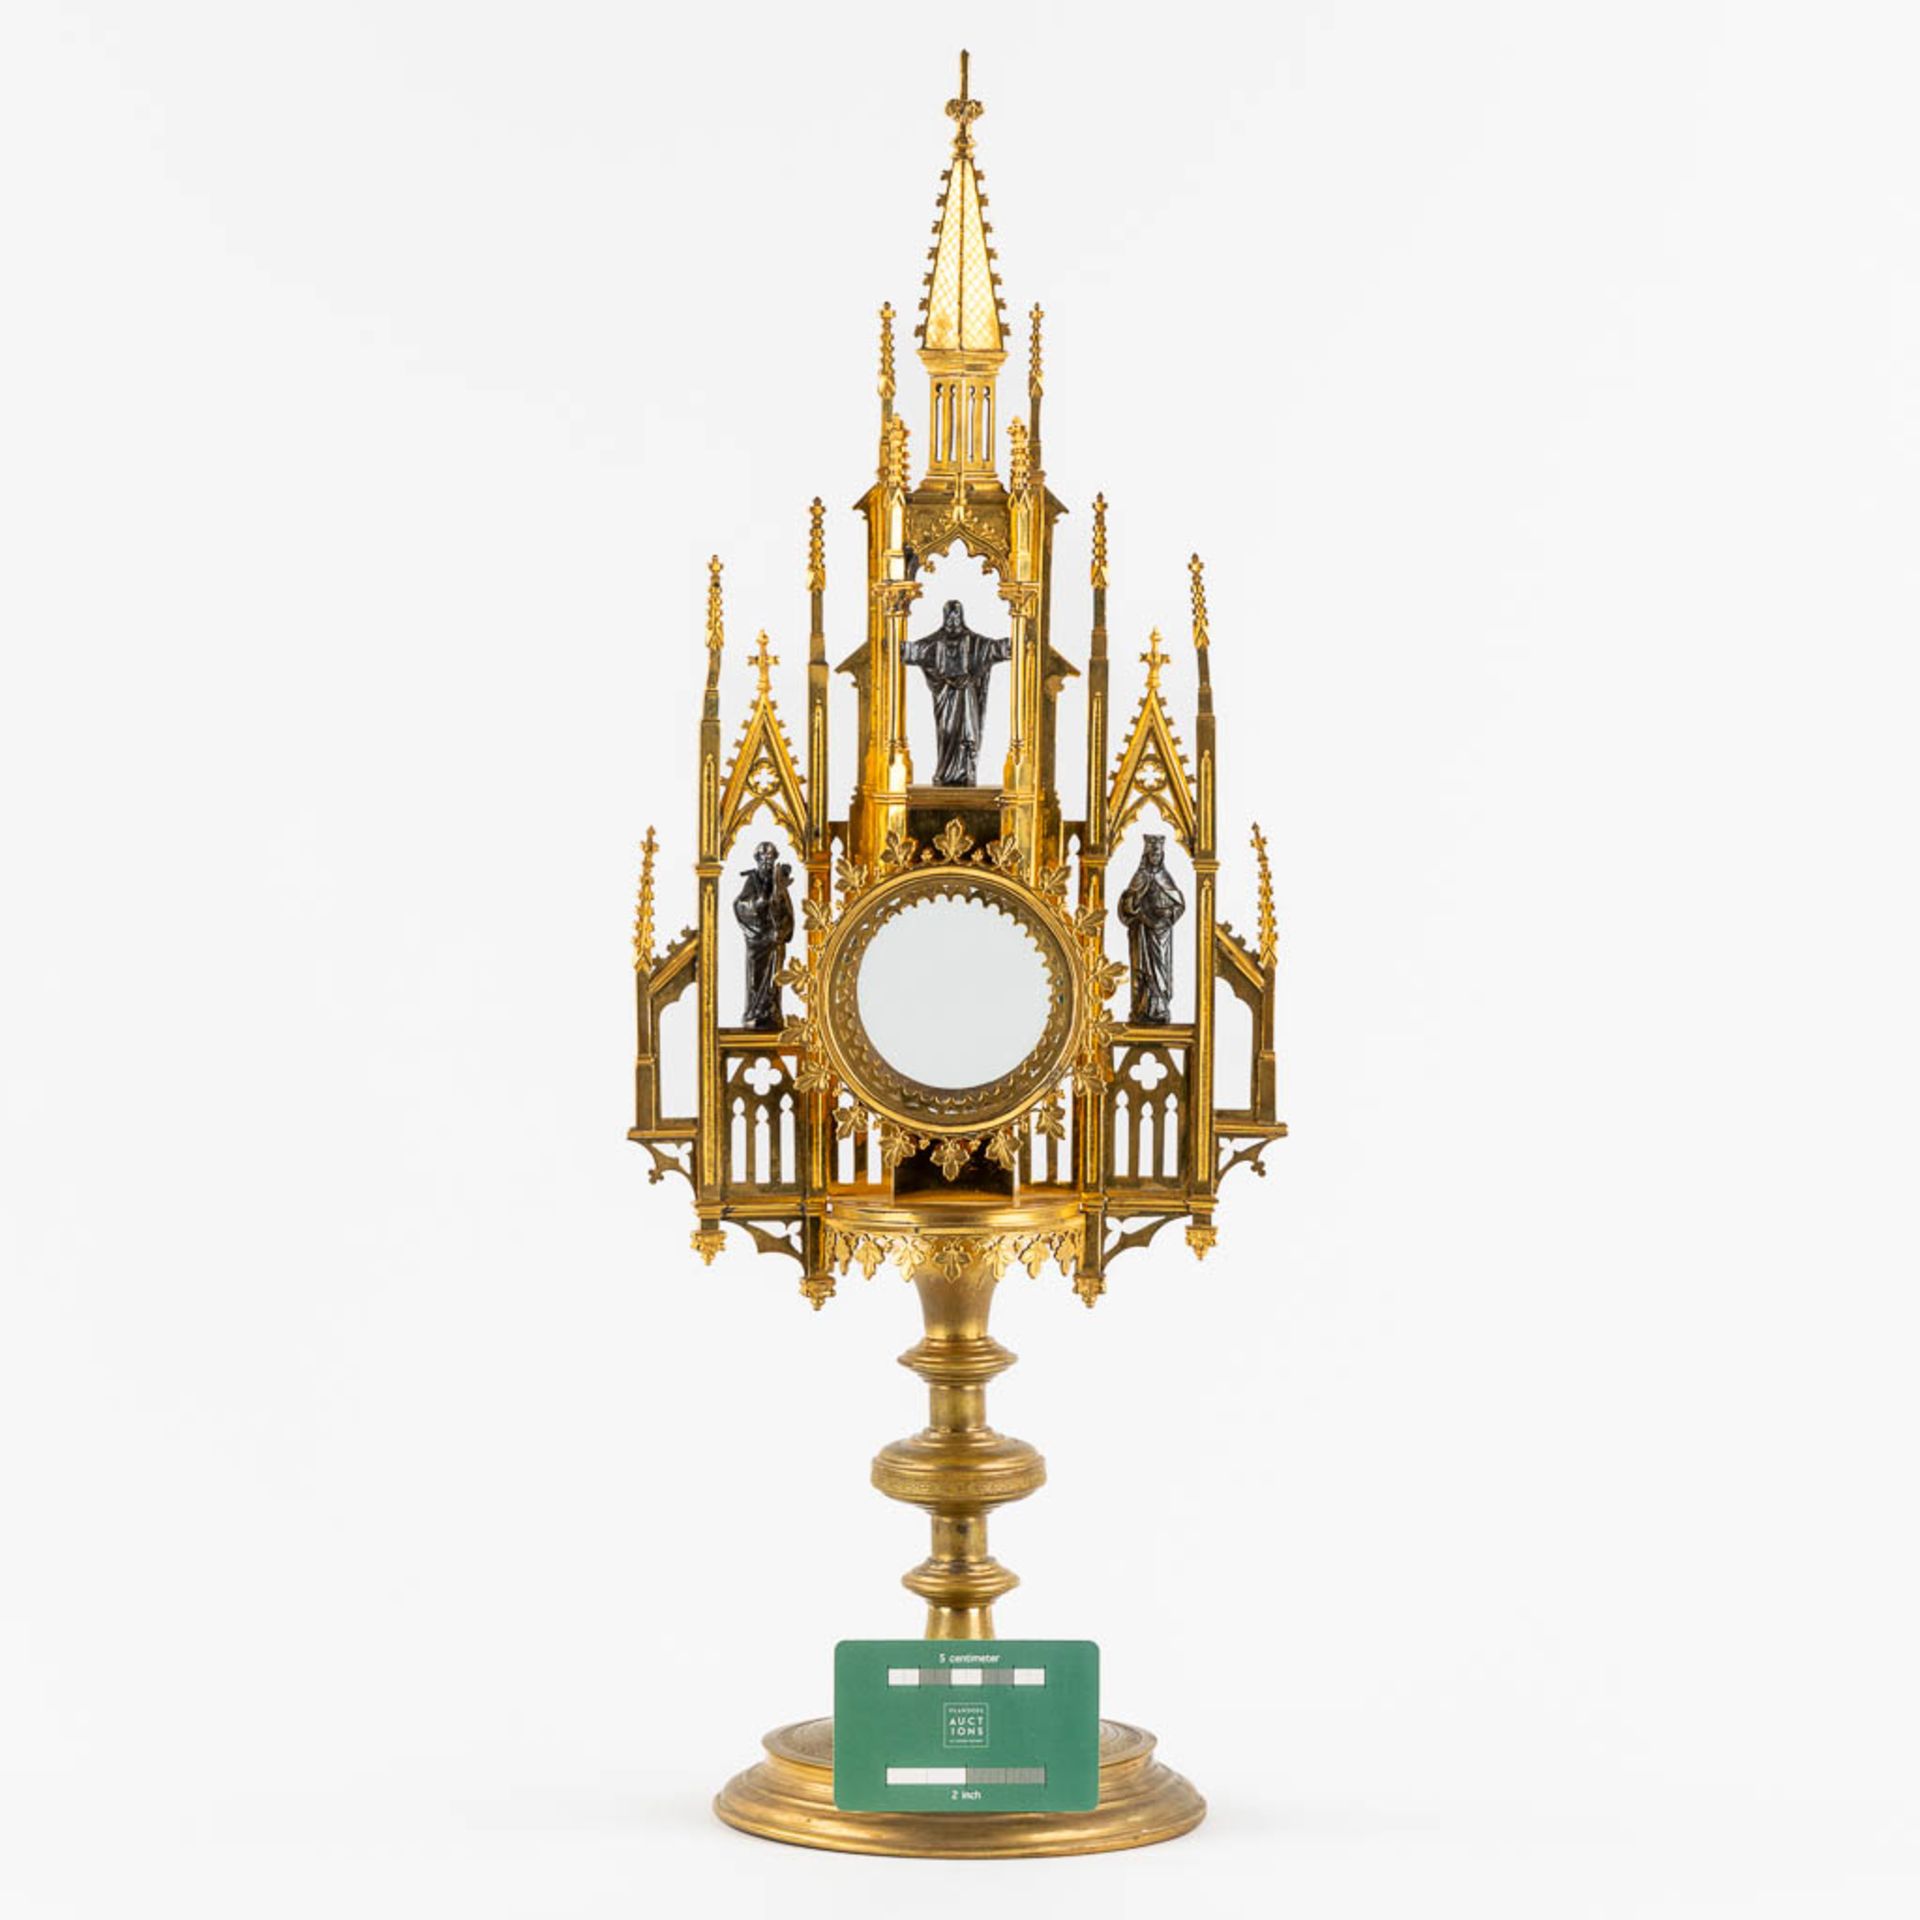 A Tower monstrance, gilt and silver plated brass, Gothic Revival. 19th C. (W:21,5 x H:58 cm) - Image 8 of 22